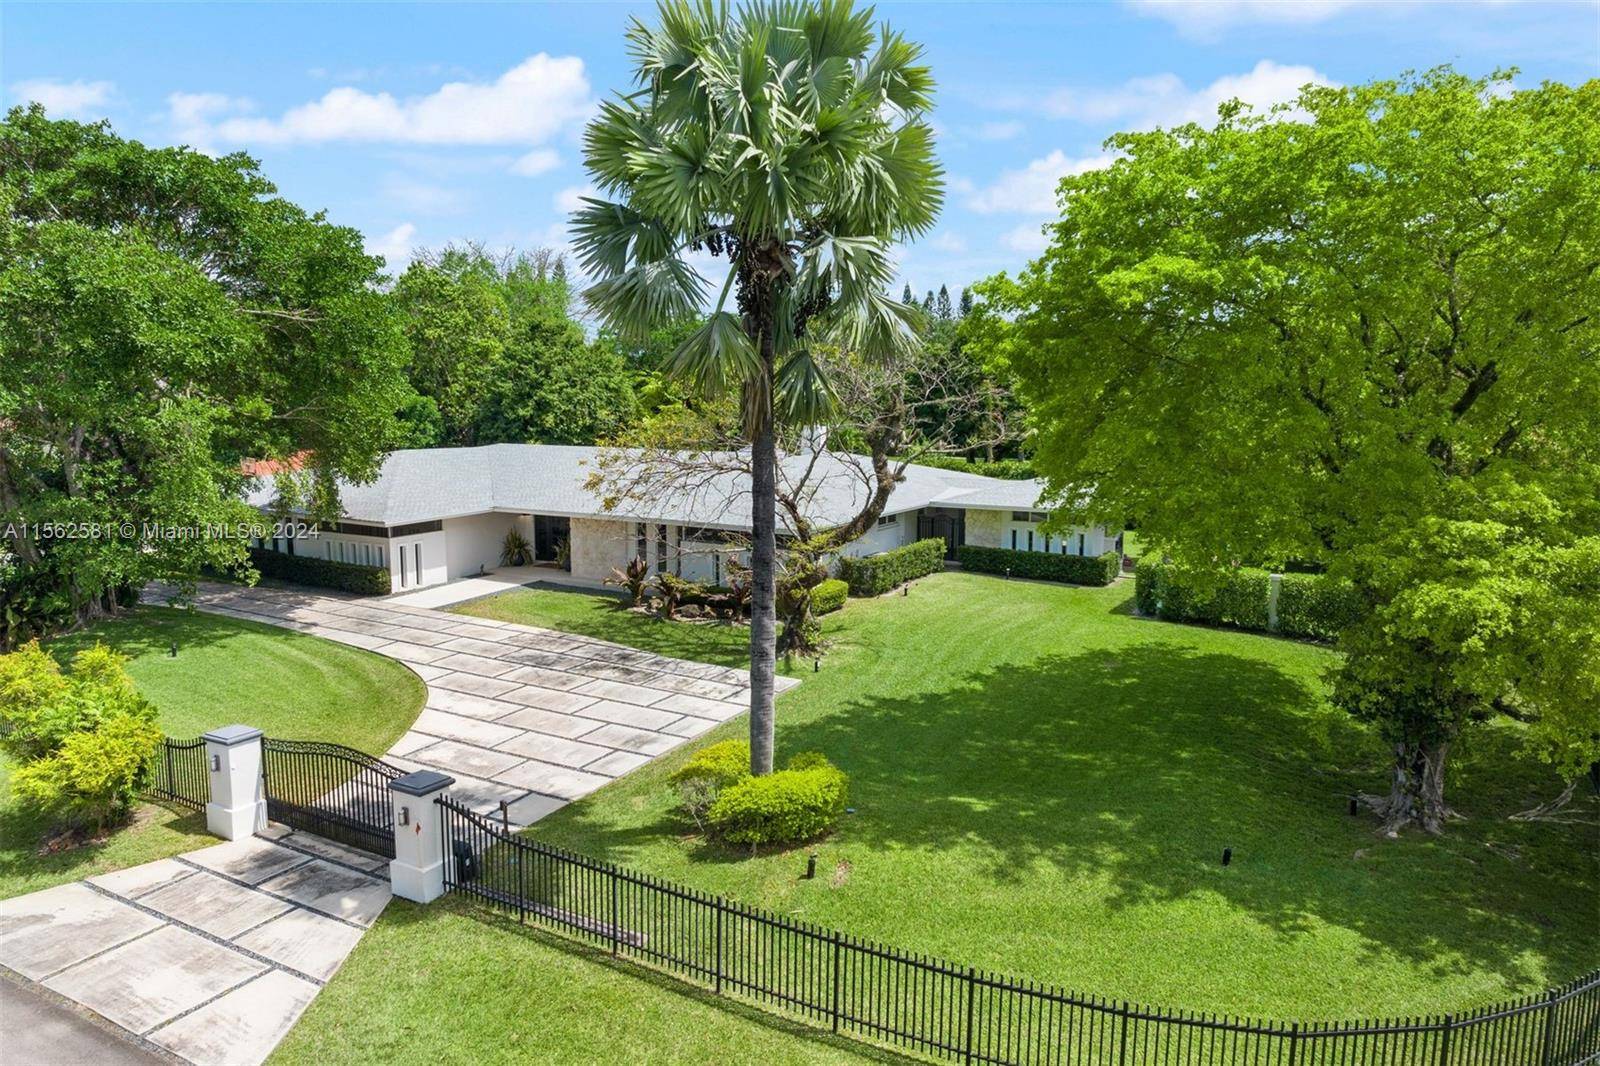 Gated family home on corner acre lot in one of the most sought after neighborhoods of South Florida.